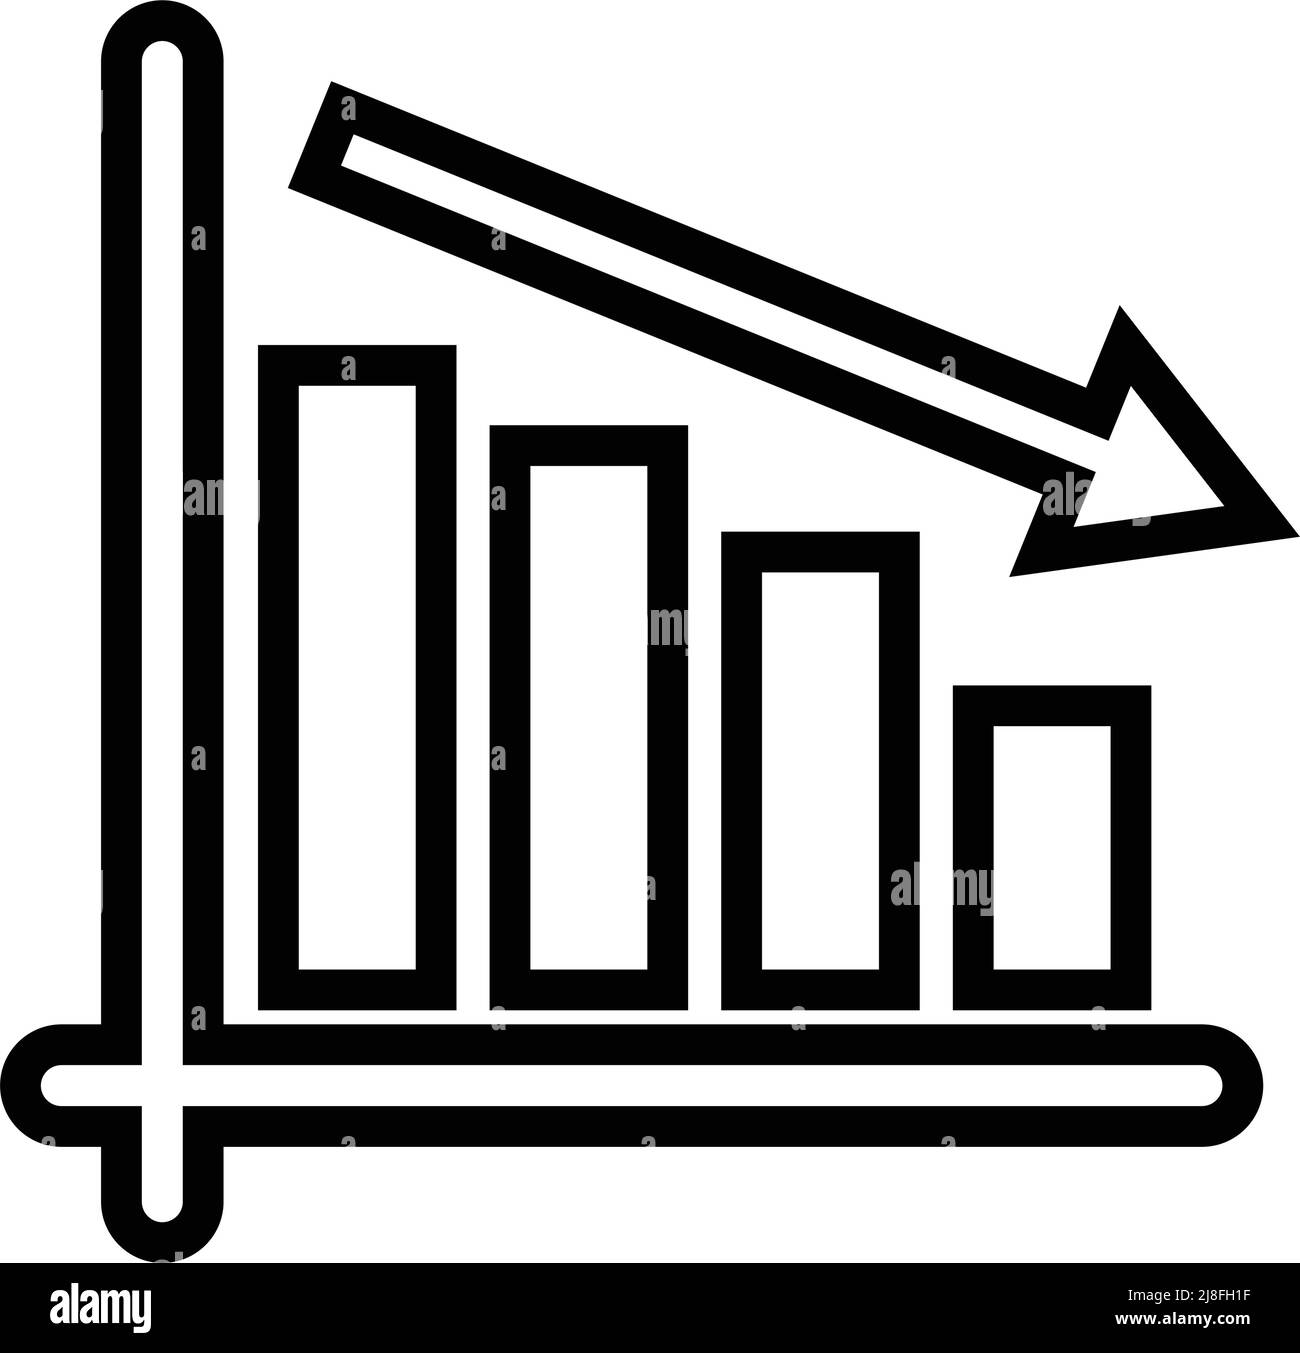 Decreasing arrow and bar graph icon. Vectors of business performance and investment results. Editable vector. Stock Vector